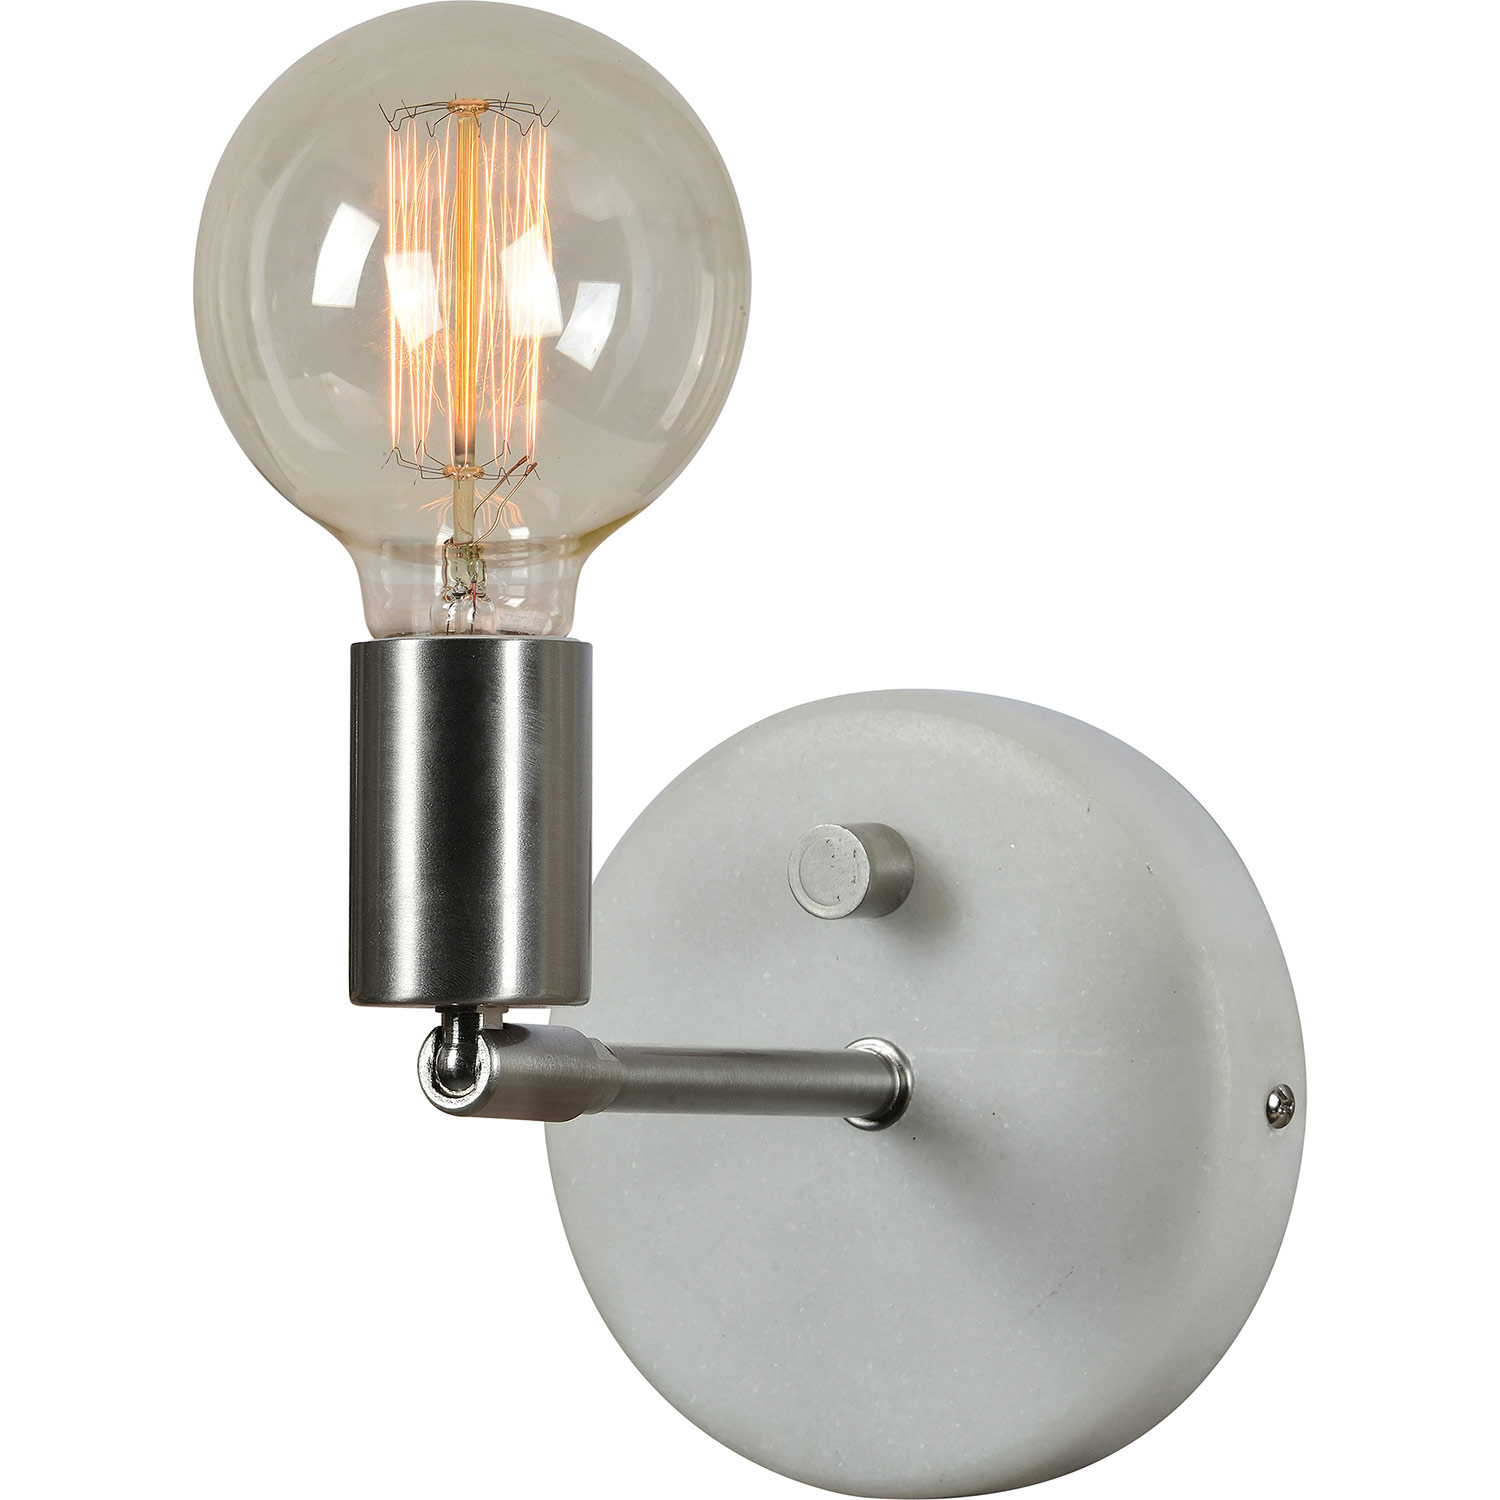 Ren-Wil Margerie Wall Sconce - Satin Nickel/White Marble